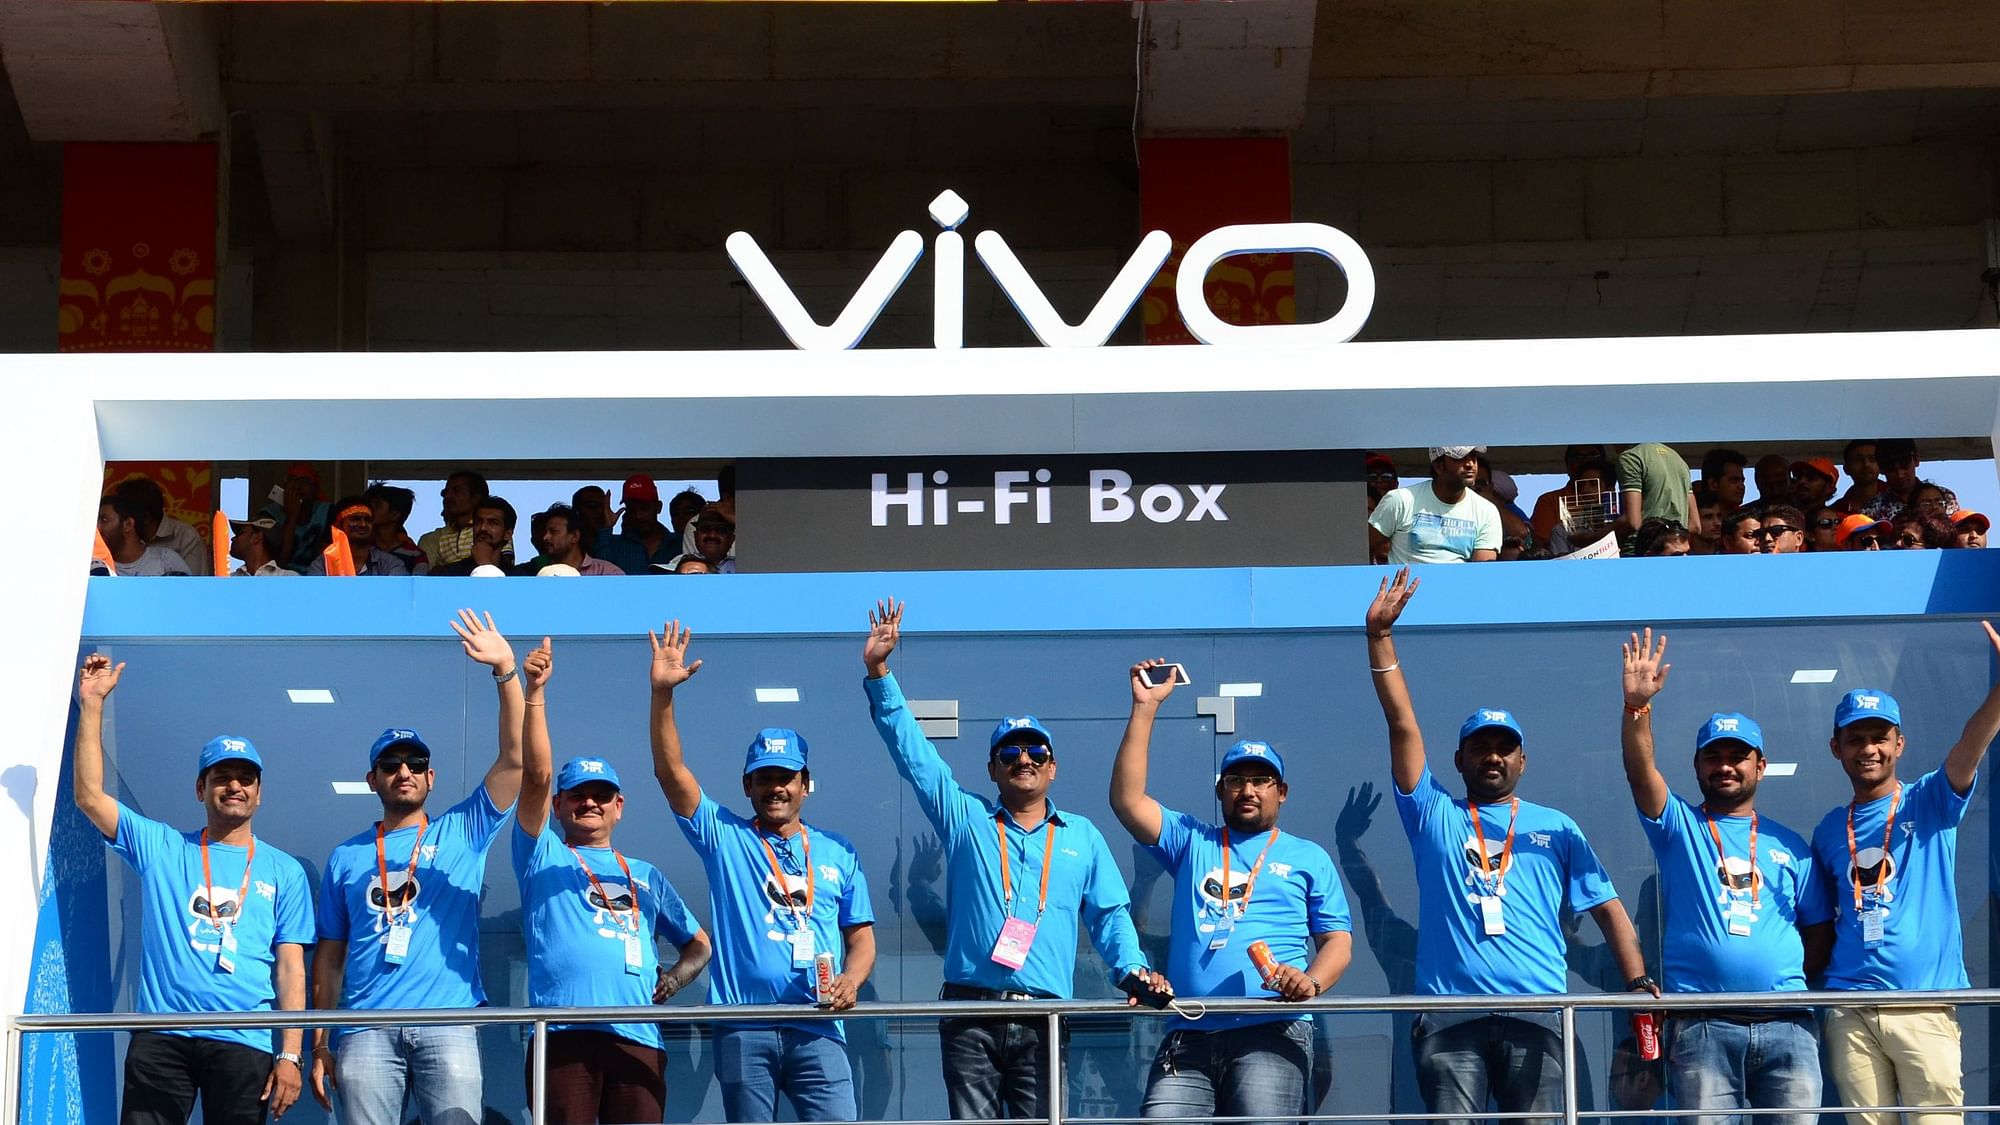 How much is Vivo’s IPL title sponsor deal worth?